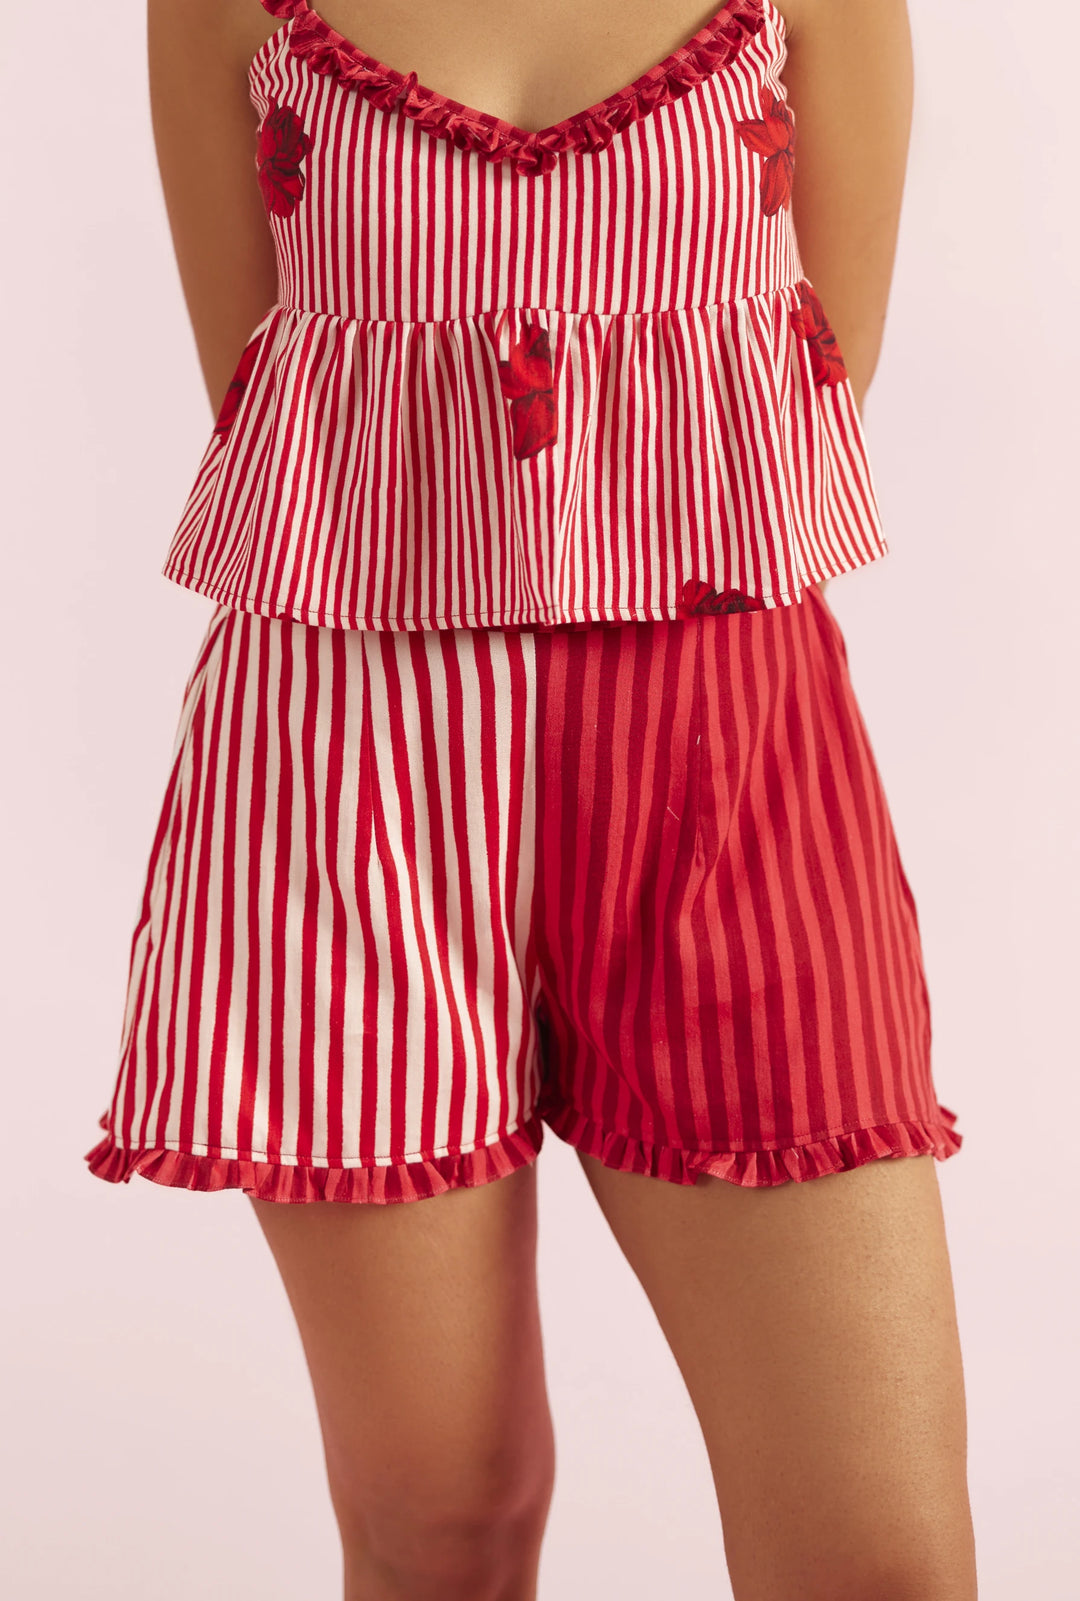 Mad Love Striped Shorts